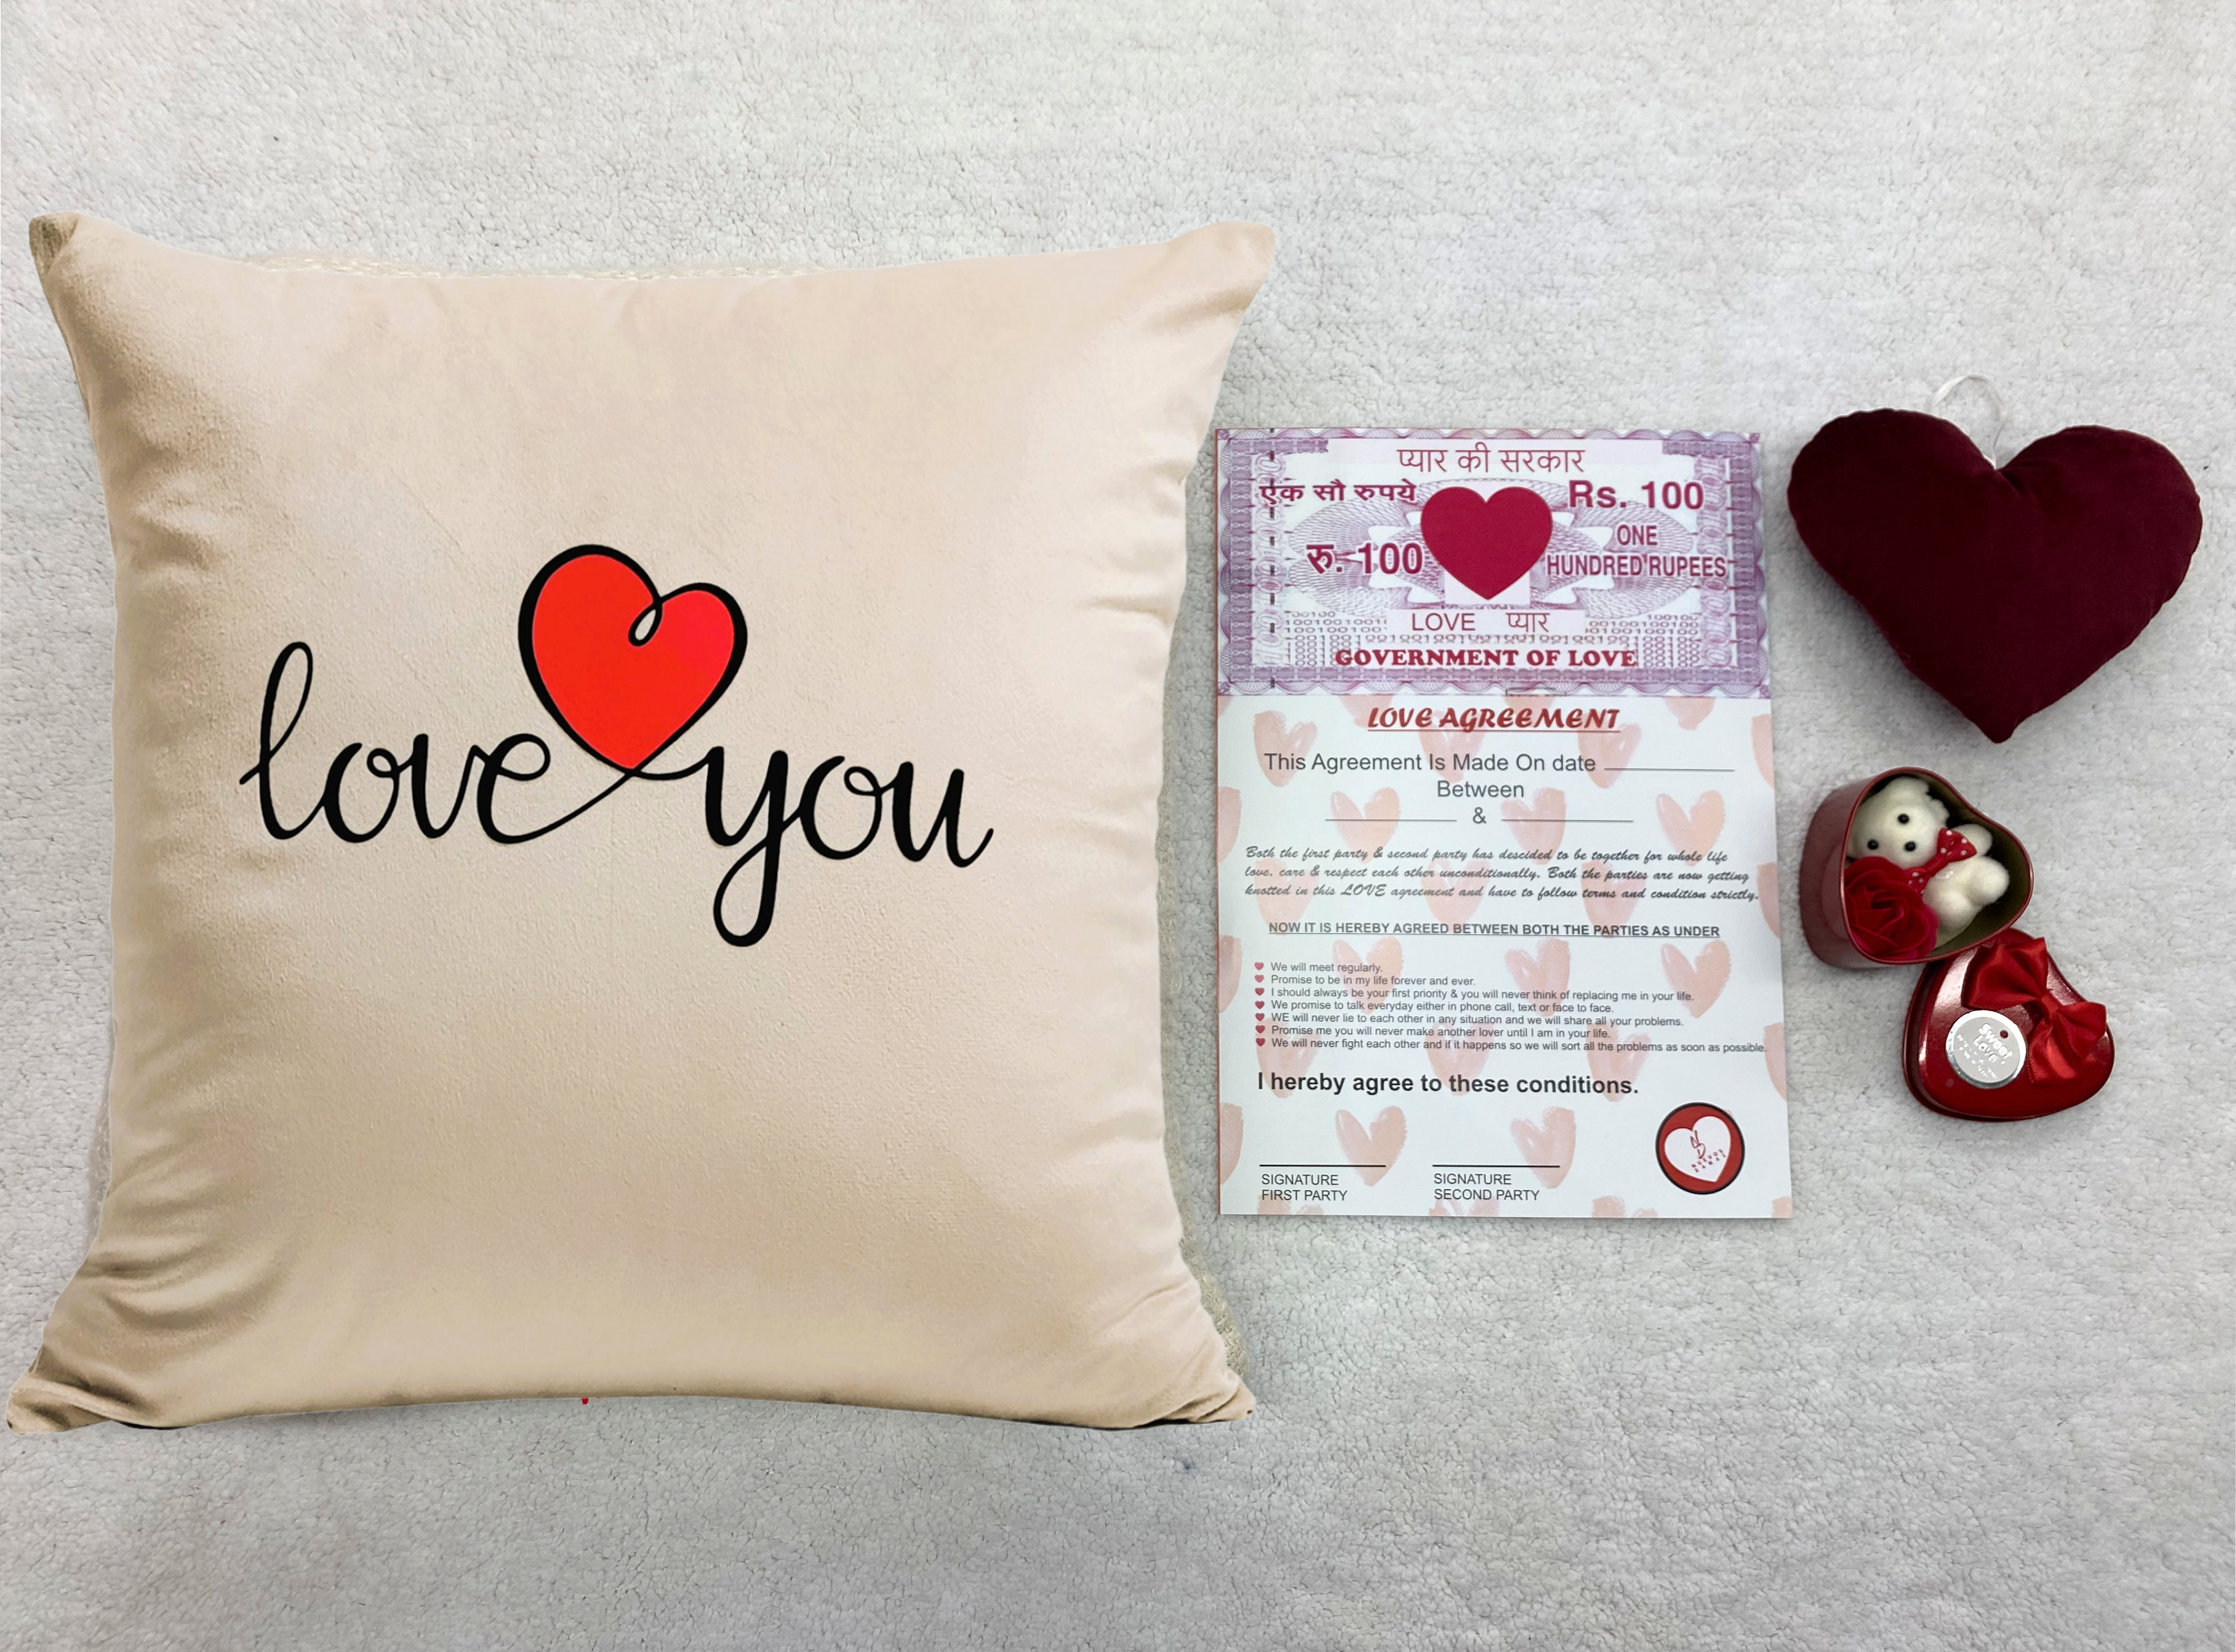 Buy FestivalsBazar Valentine Week Gift For 7 Days For Your Girlfriend |  Boyfriend | Husband | Wife Online In India At Discounted Prices